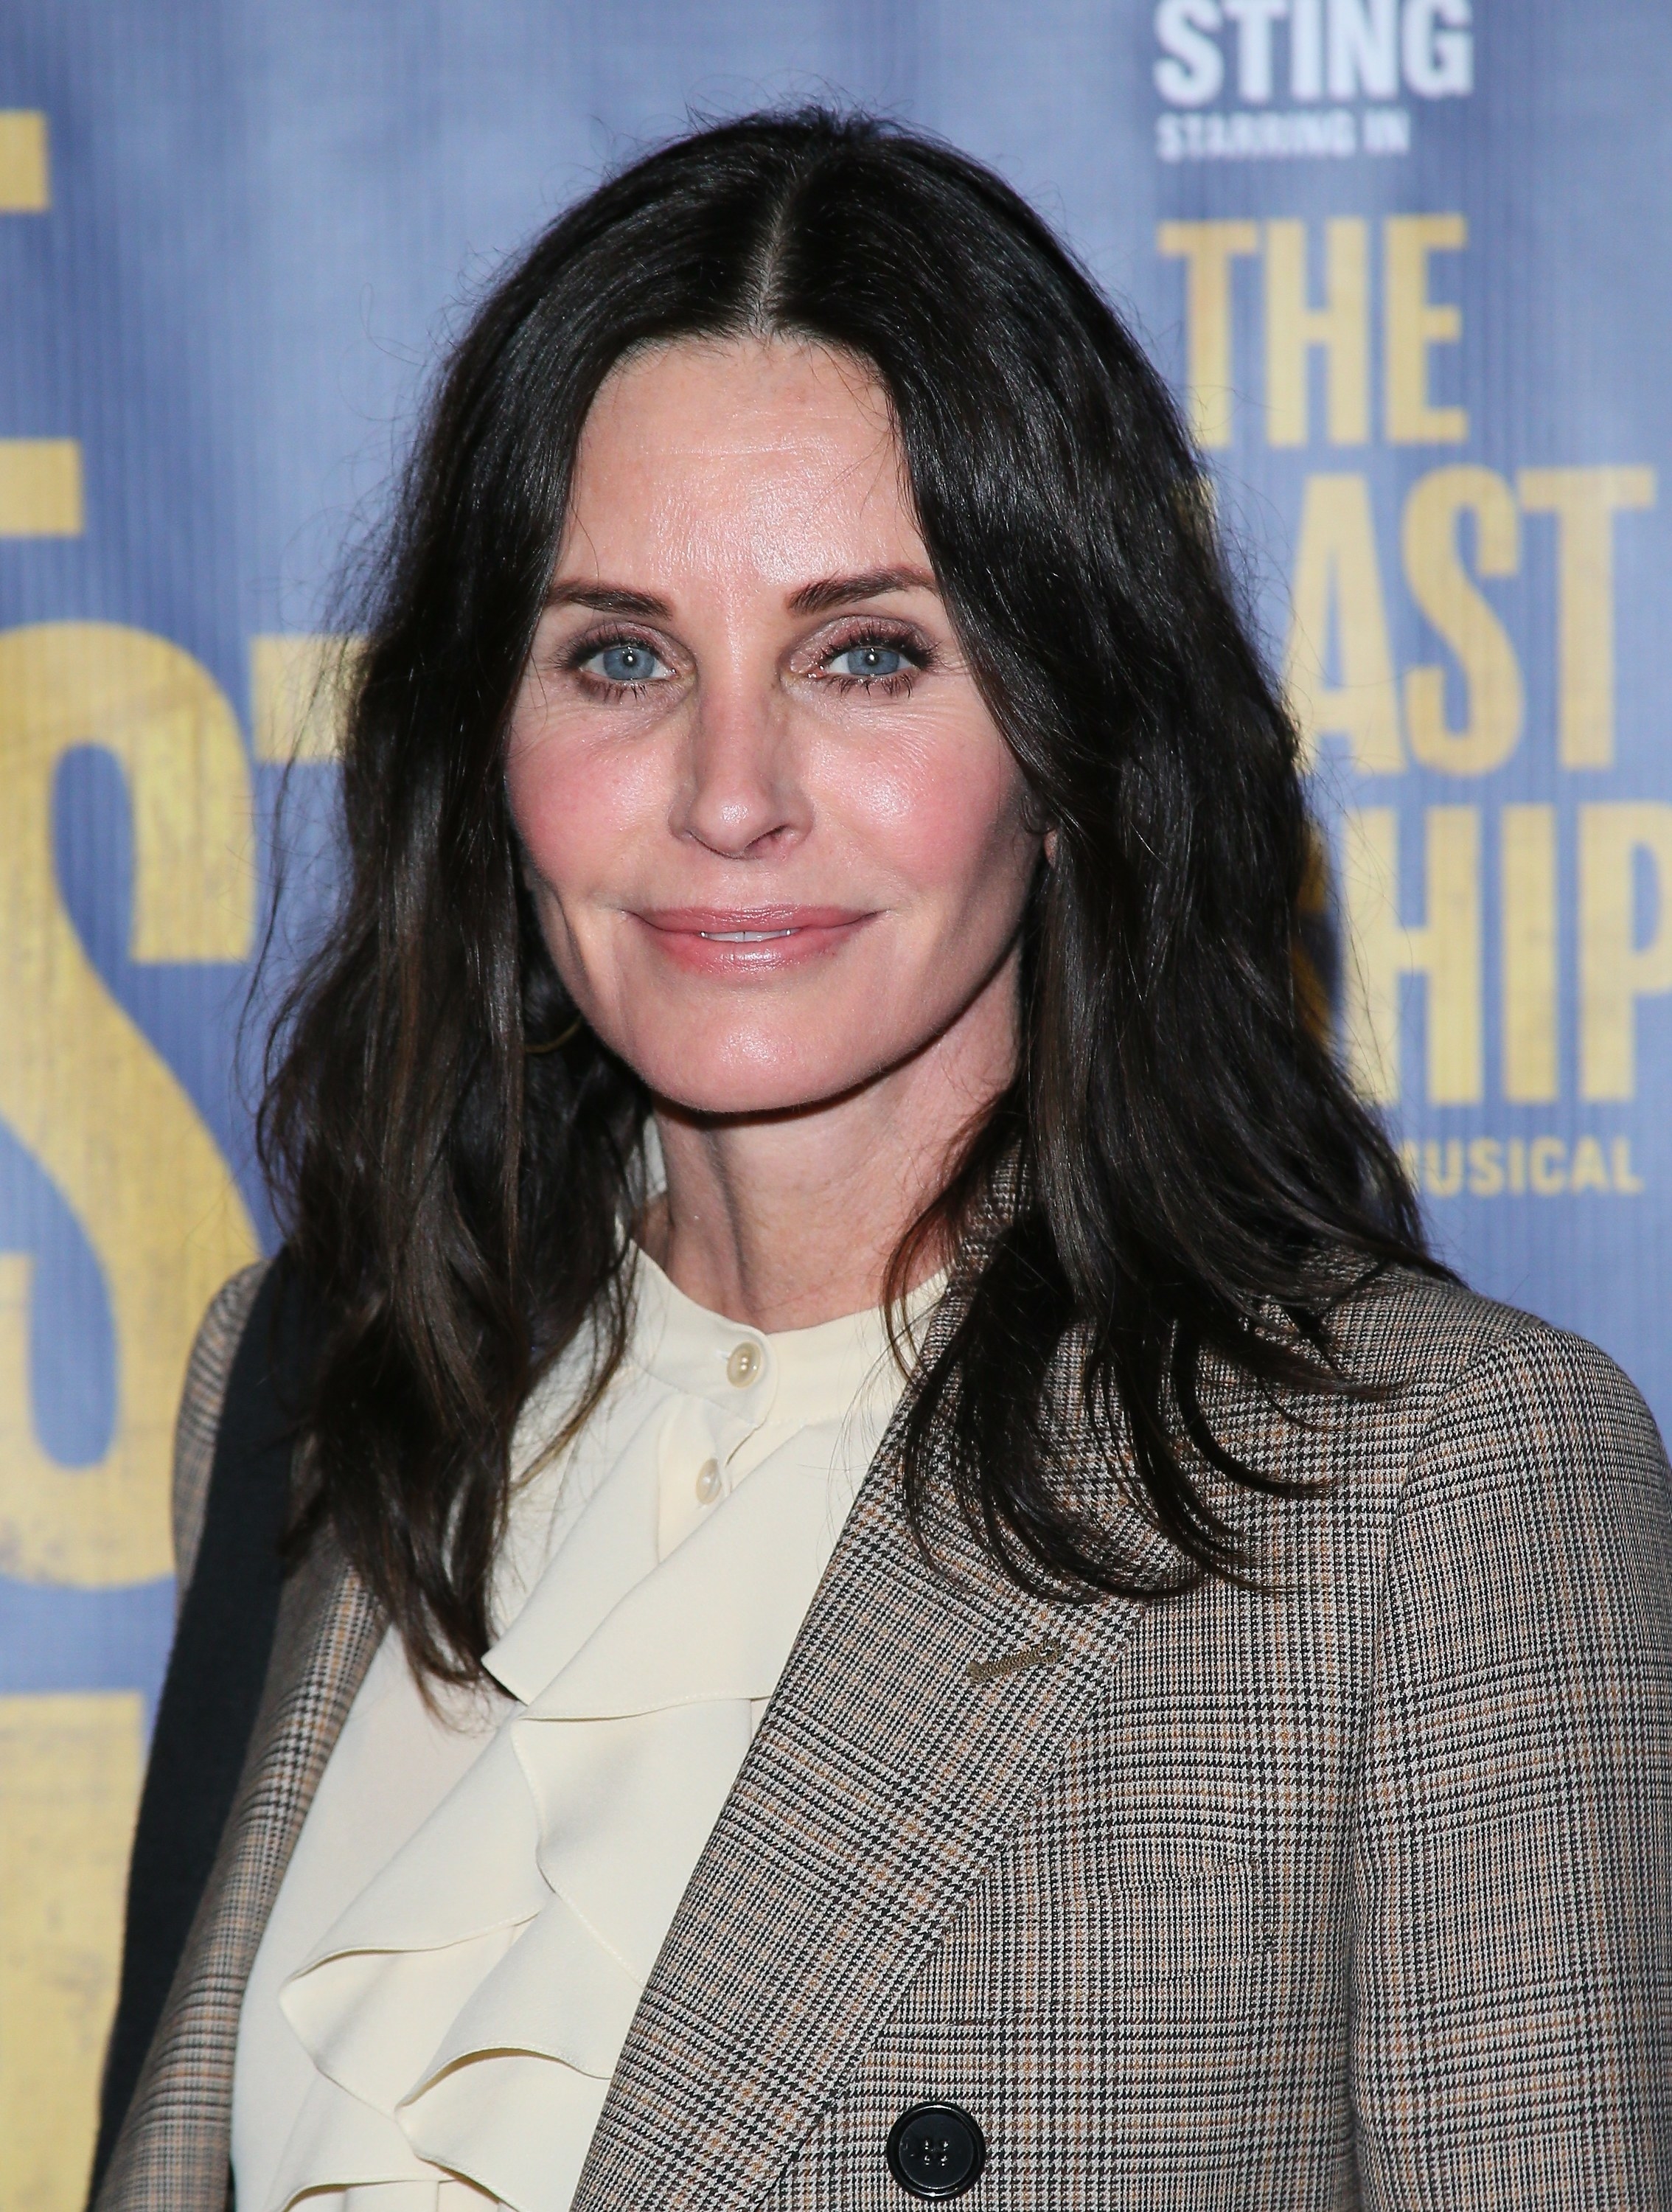 Courteney Cox poses at the opening night of &quot;The Last Ship&quot; on January 22, 2020